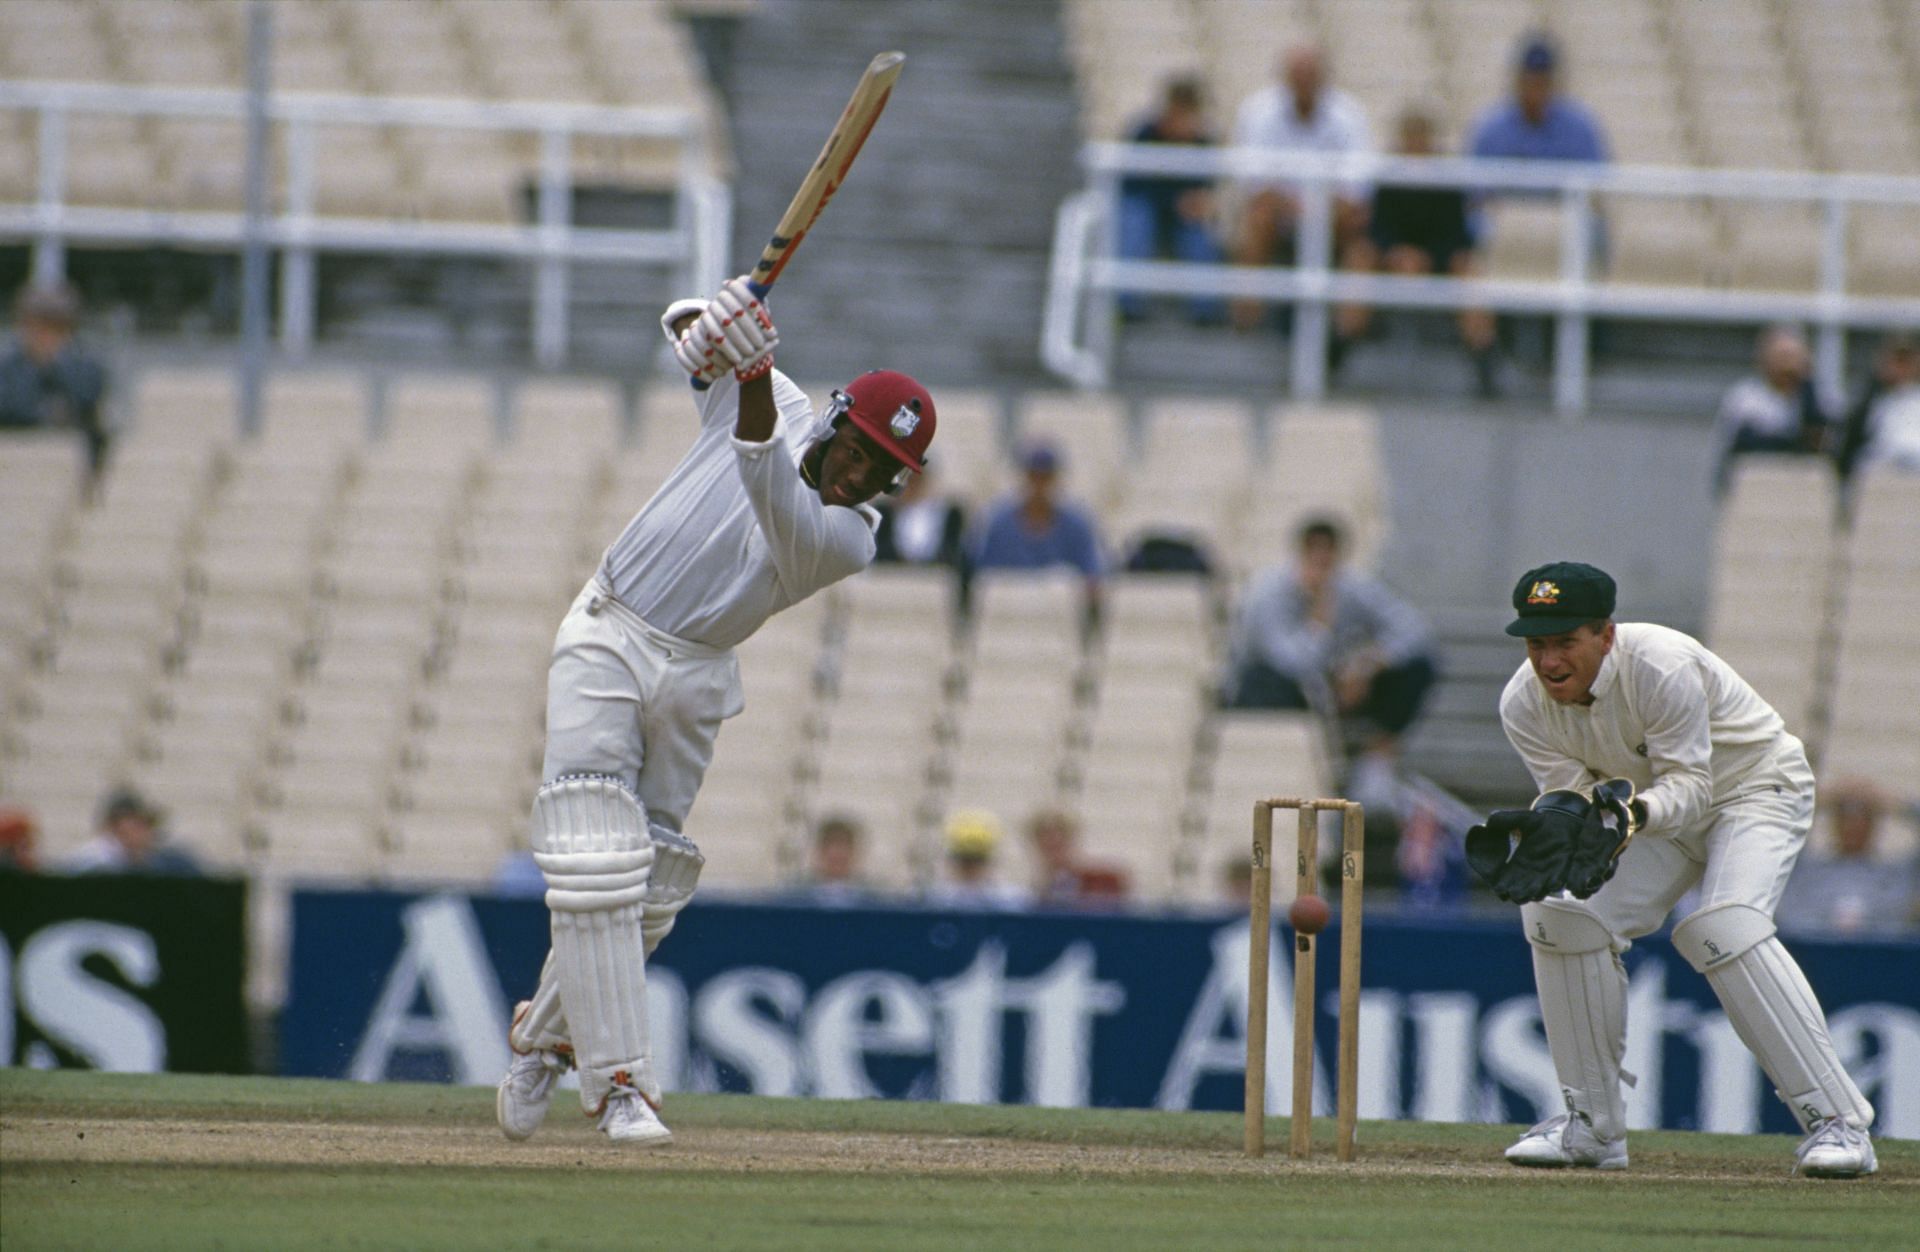 Brian Lara during his innings of 277 at SCG in 1993. (Pic: Getty Images)